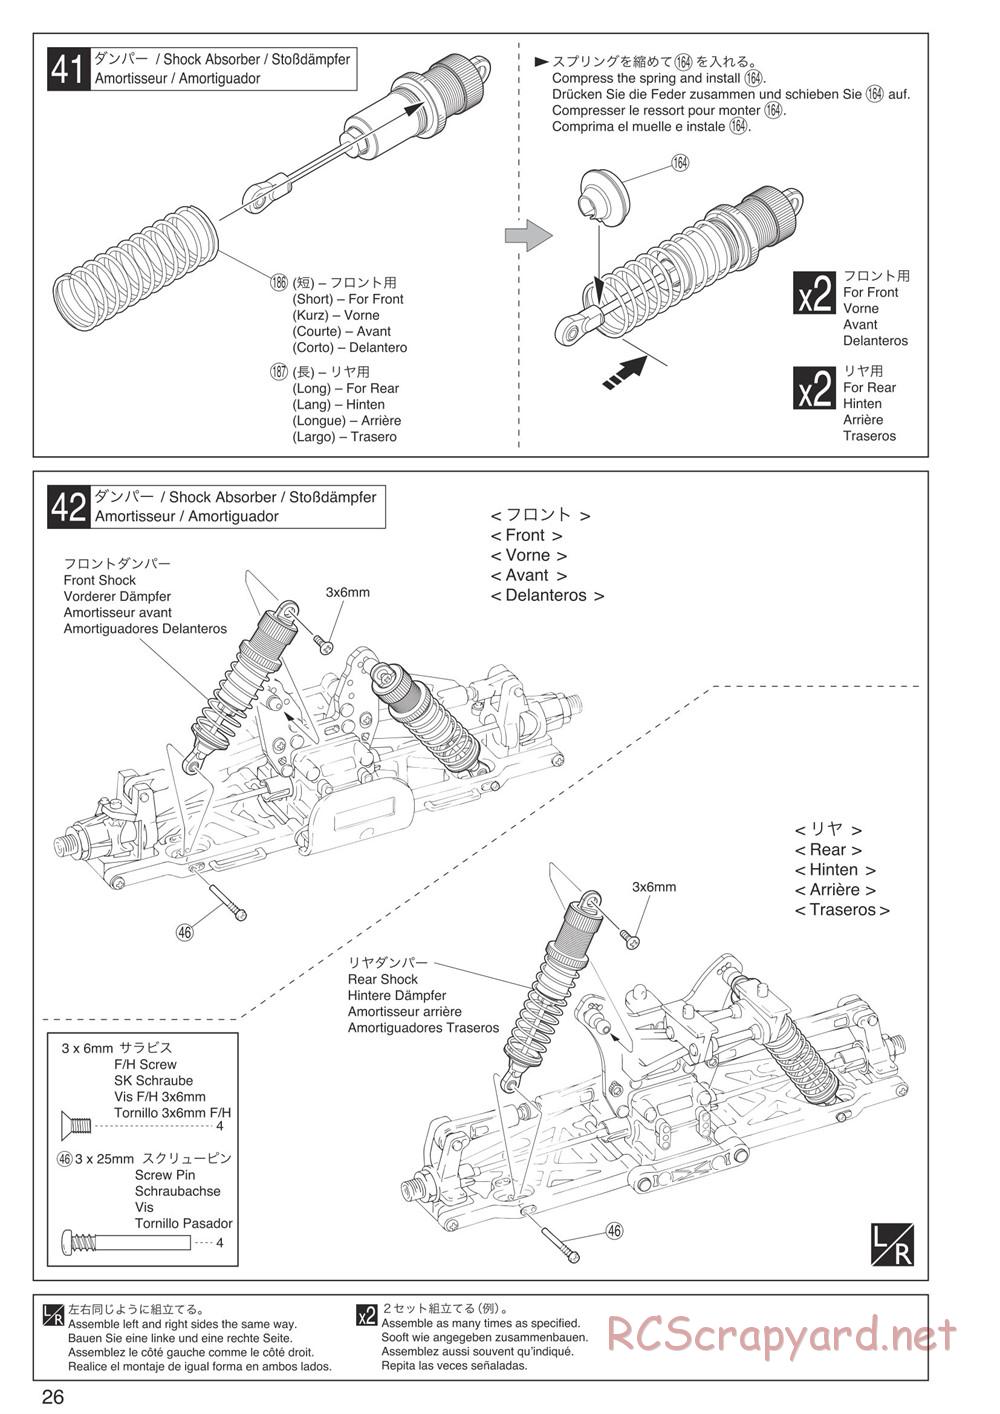 Kyosho - Inferno Neo 3.0 - Manual - Page 25